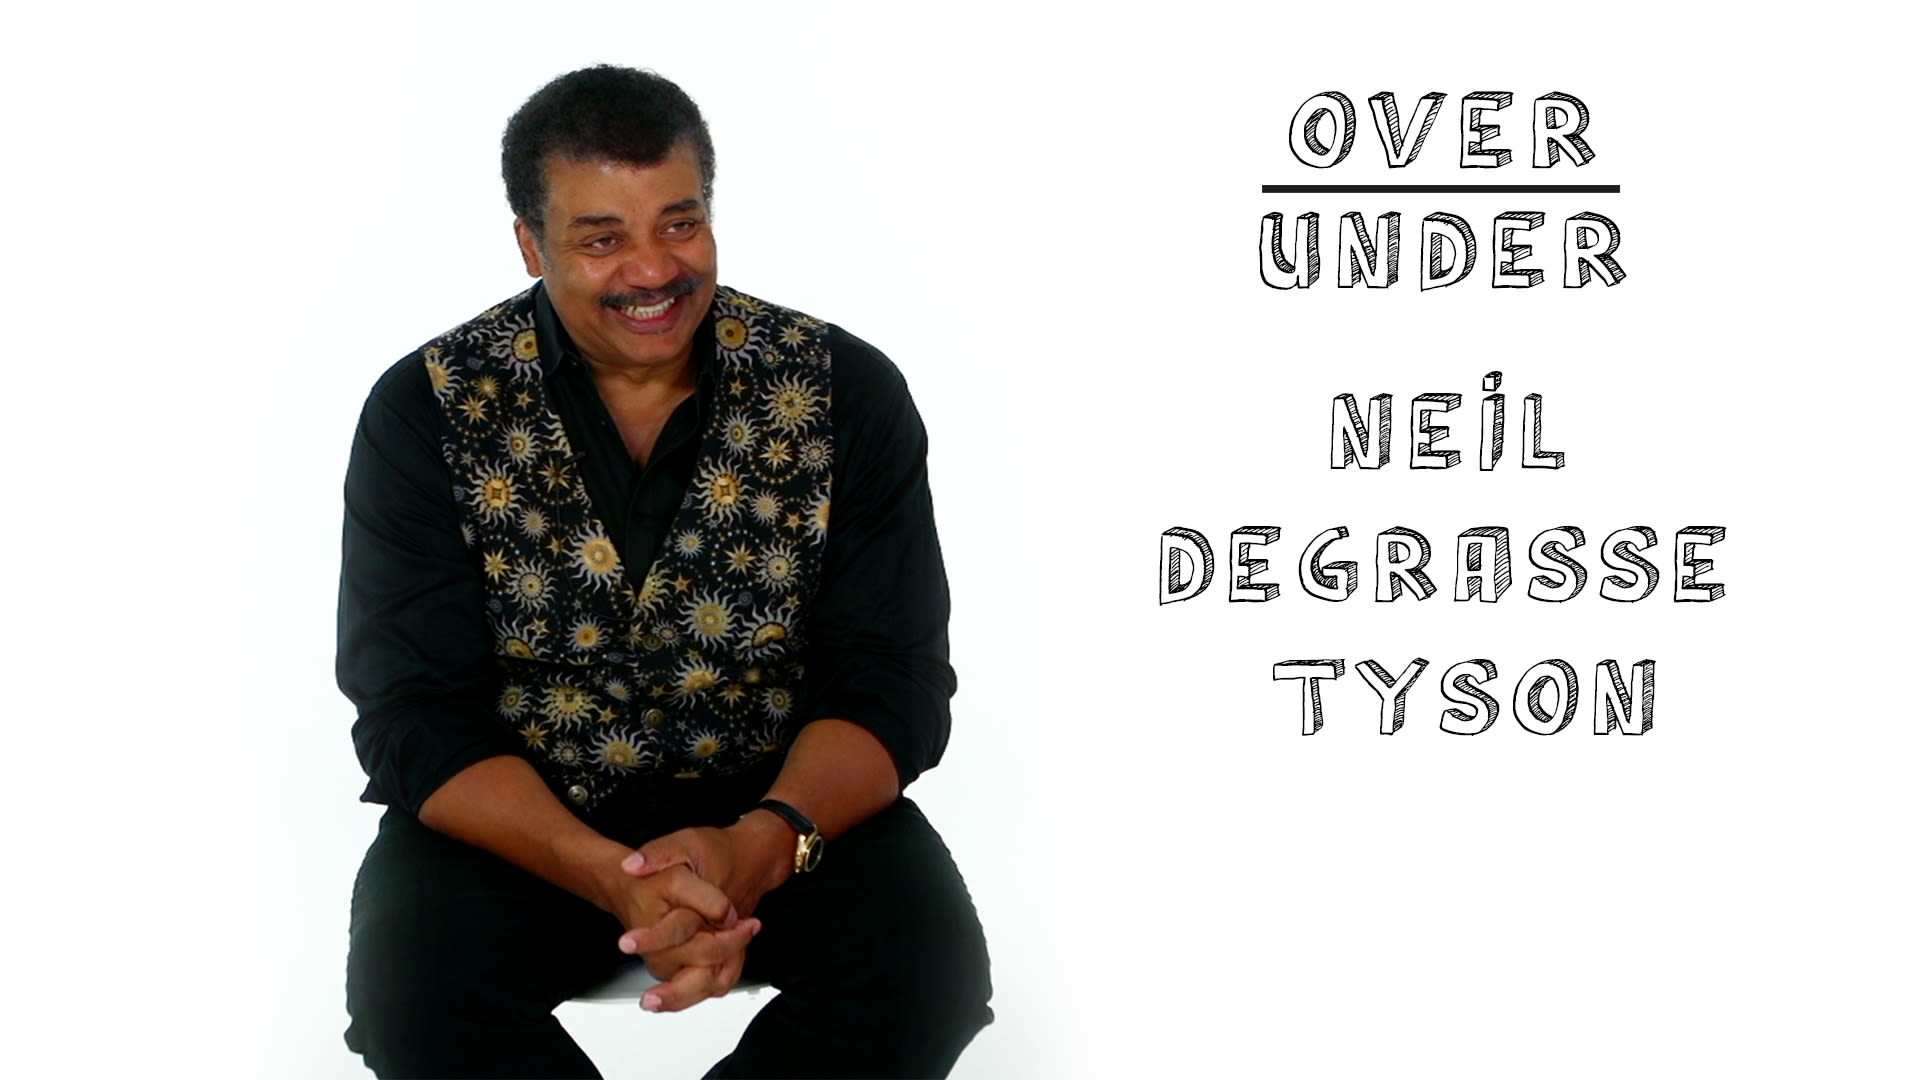 Allison Tyson Porn - Watch Neil deGrasse Tyson Rates Exotic Male Dancing, GZA, and Galactic  Apparel | Over/Under | Pitchfork